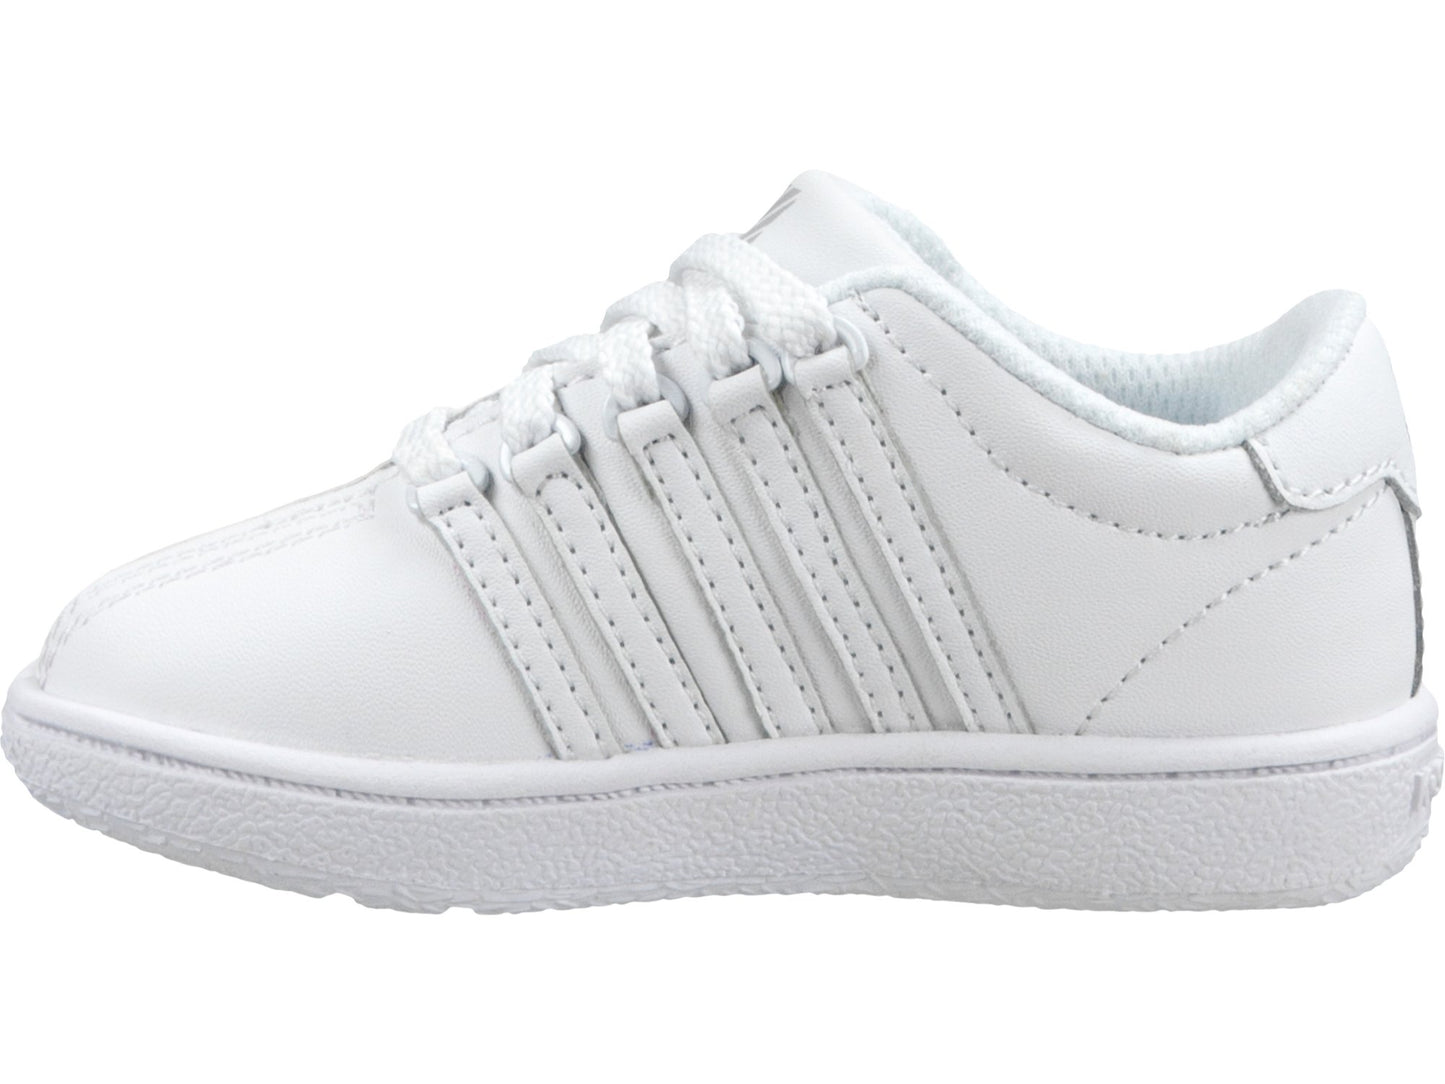 K-Swiss Infant Toddler Classic VN Medium Low Top Shoes White / White 23343-912-M